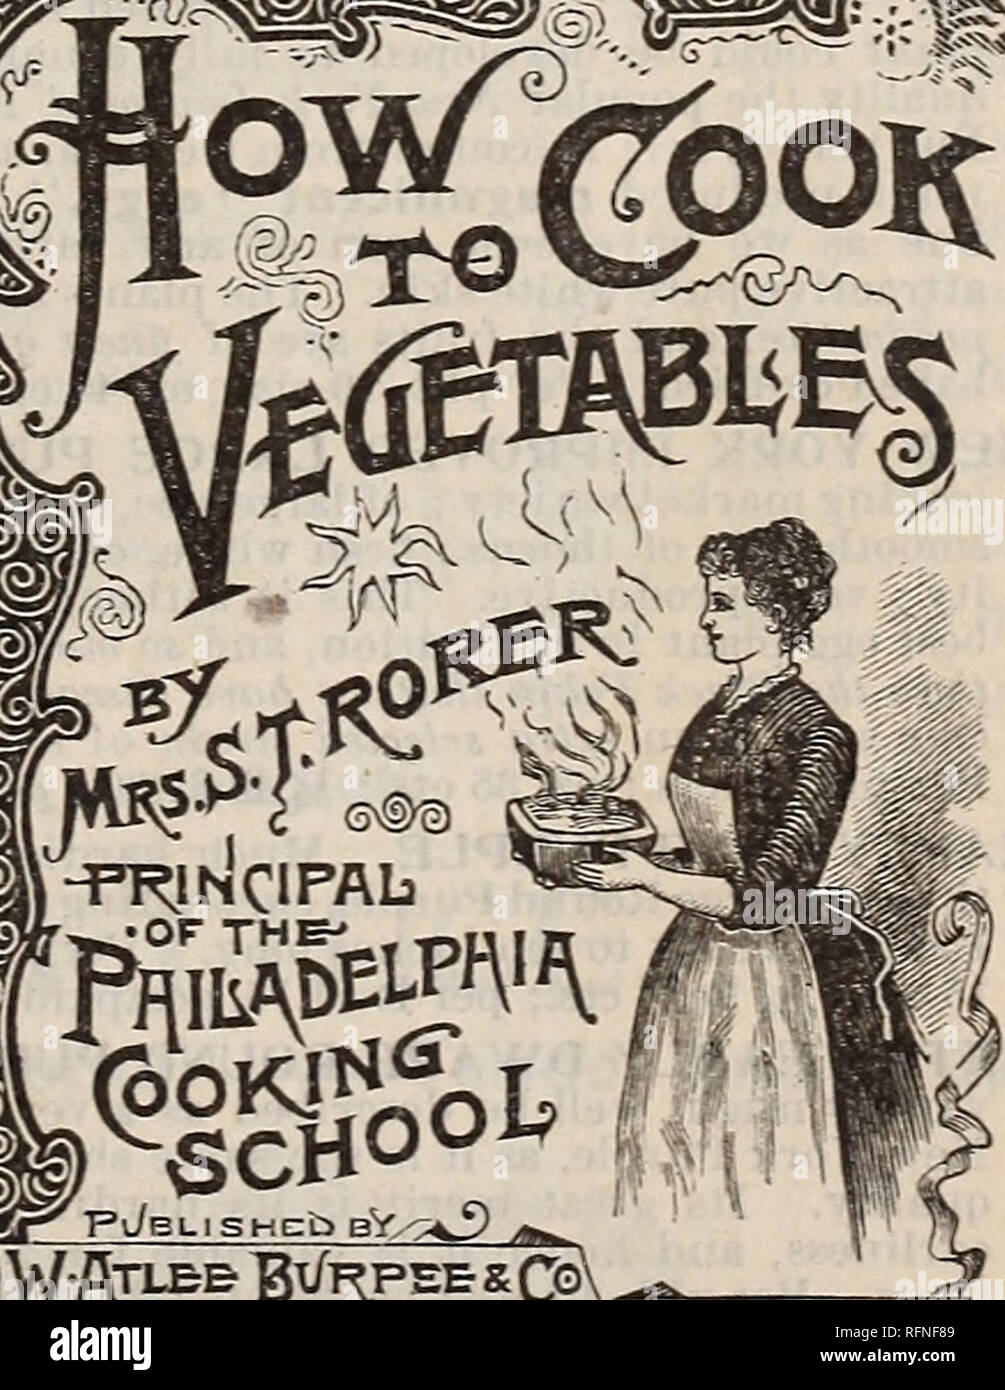 . Burpee's farm annual written at Fordhook Farm. Nurseries (Horticulture) Pennsylvania Philadelphia Catalogs; Vegetables Seeds Catalogs; Plants, Ornamental Catalogs; Flowers Seeds Catalogs. How to Cook Vegetables. BY MRS. S. T. RORER, Principal of the Philadelphia Cooking School. Every family wants a copy, as Mrs. Rorer is acknowledged authority by the best housekeepers everywhere. The recipes given have all been proven by practical tests in the kitchen and on the table. It is a book of 182 pages, and gives numerous recipes for cooking all varieties of vegetables in every style—many of which w Stock Photo